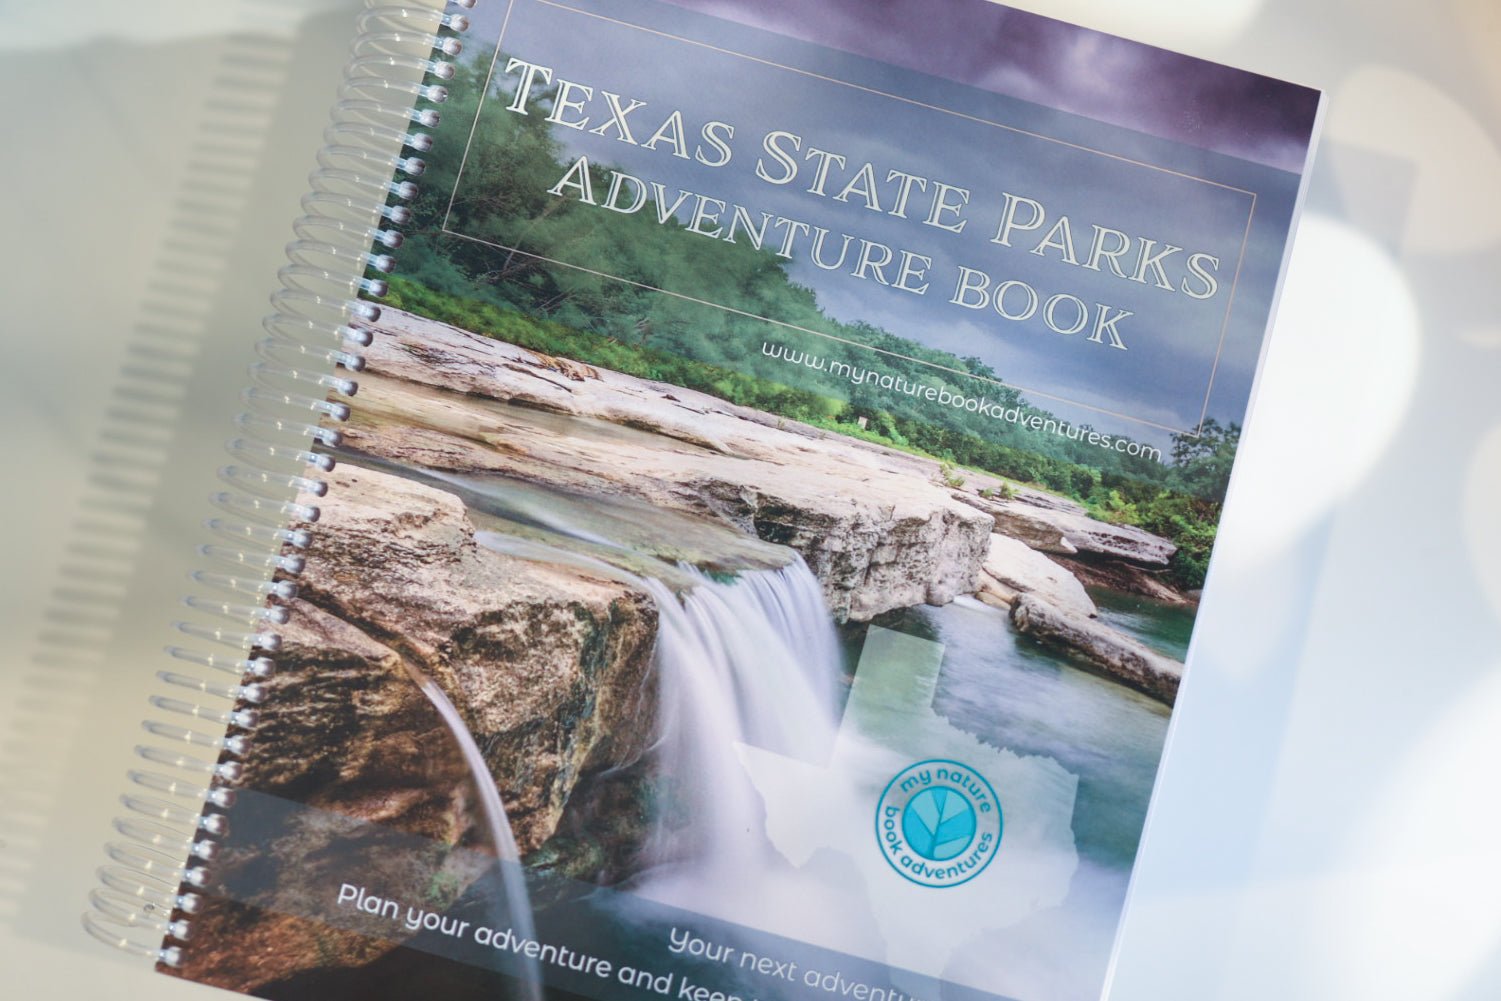 Texas State Parks - Adventure Planning Journal - My Nature Book Adventures